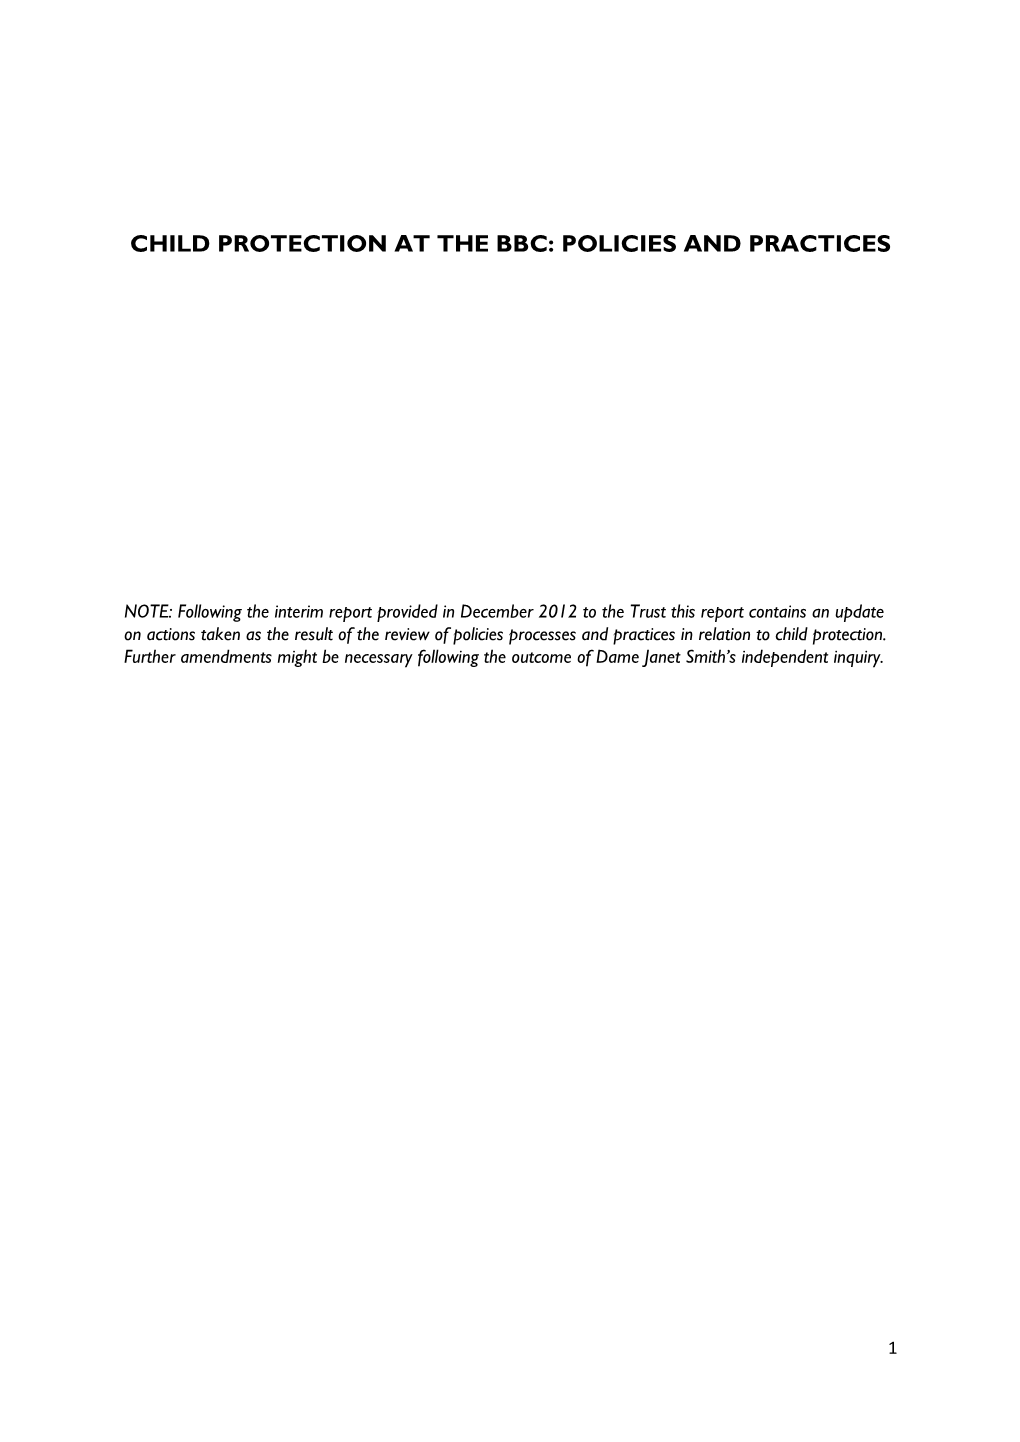 Child Protection at the Bbc: Policies and Practices